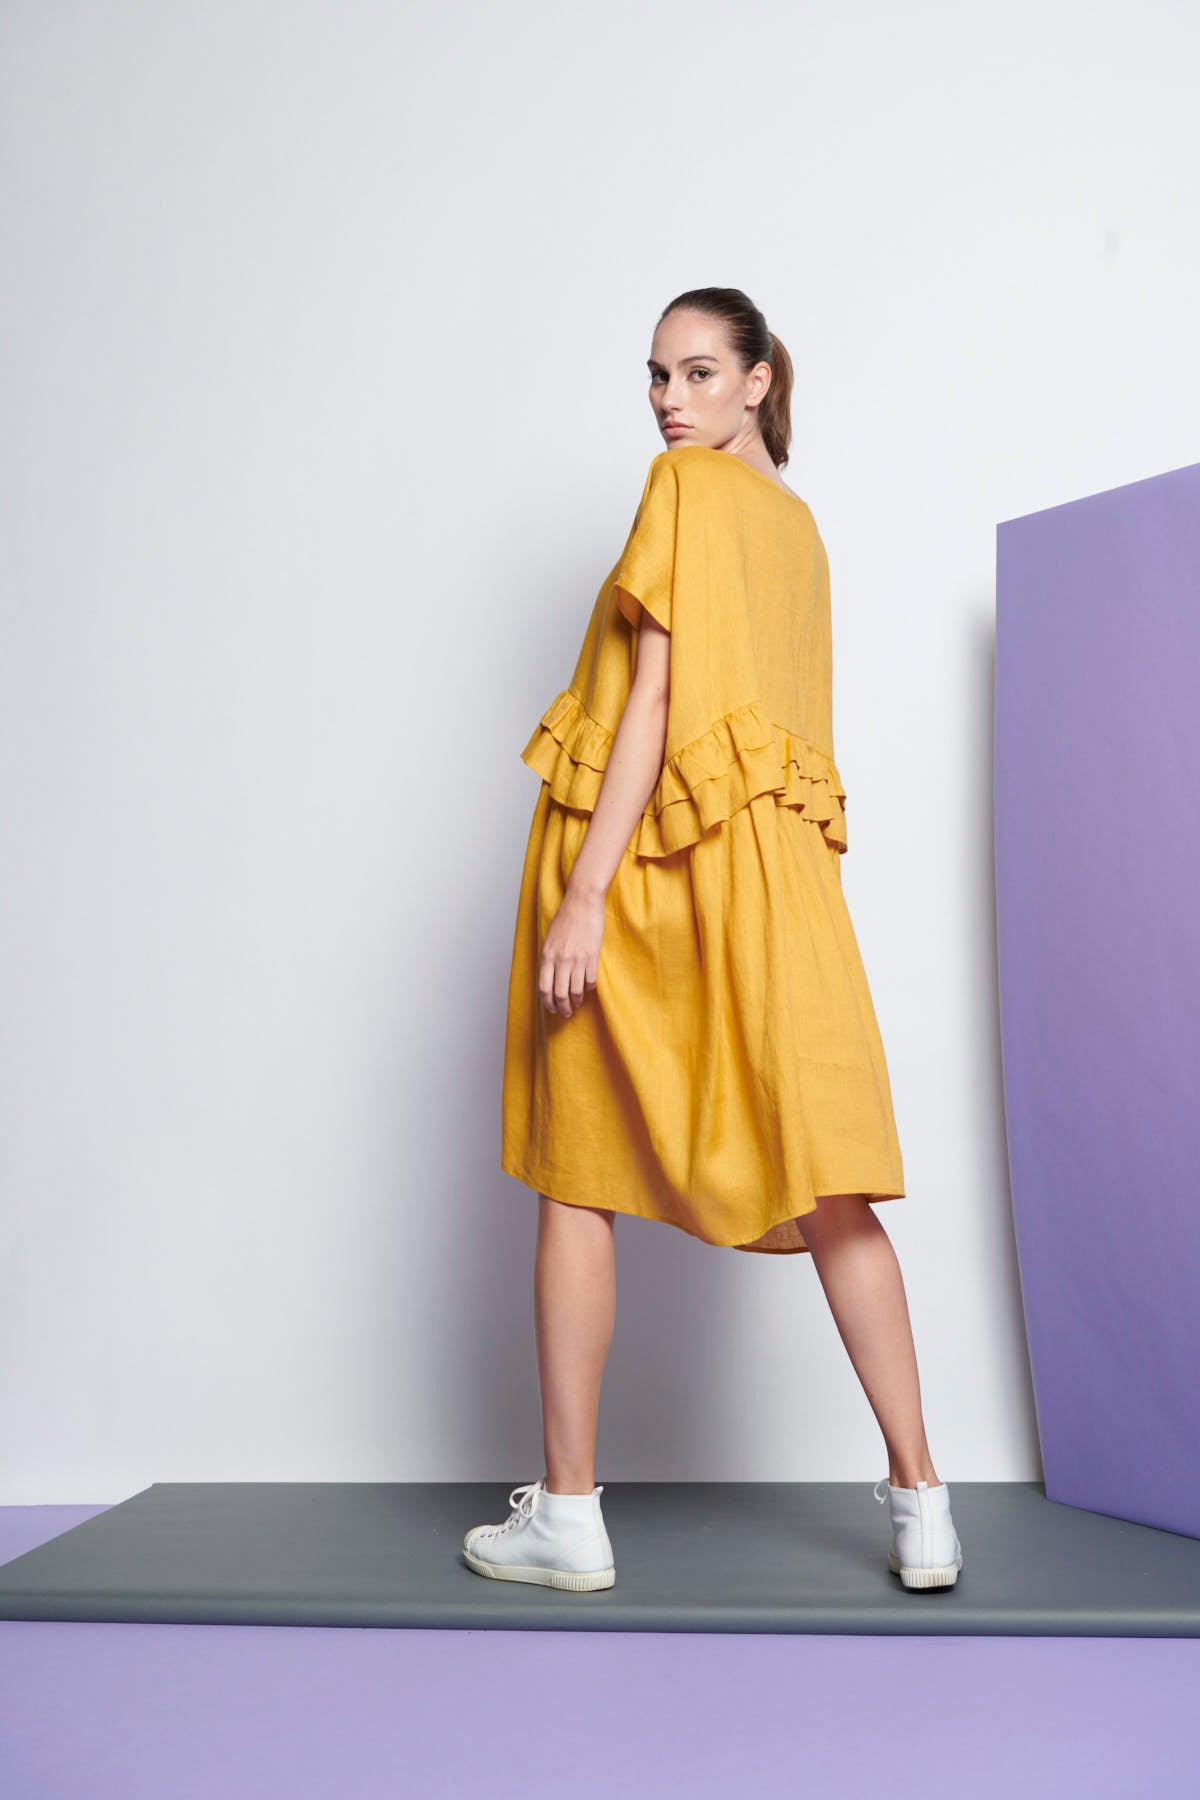 An easy-fit, knee-length tiered ruffle linen dress with round neckline and short sleeves in yellow